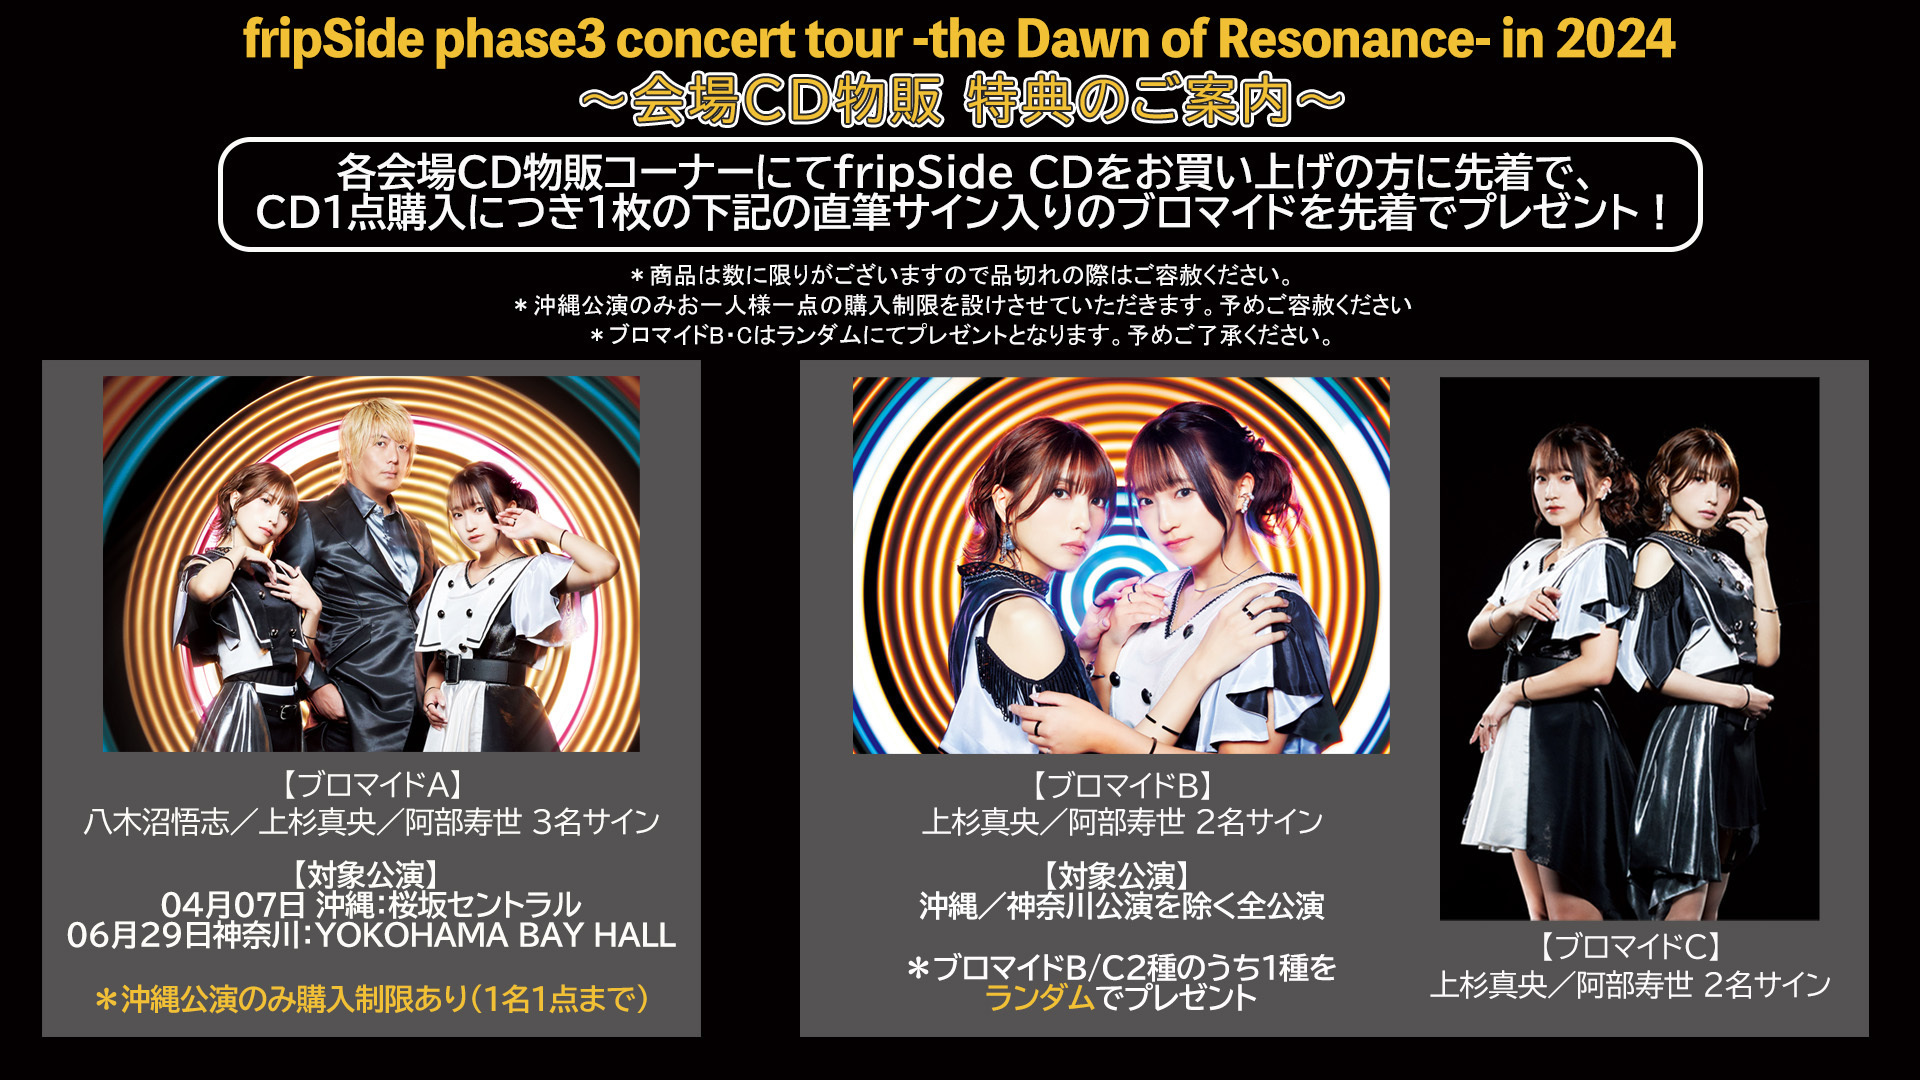 fripSide phase3 concert tour -the Dawn of Resonance- in 2024 会場 